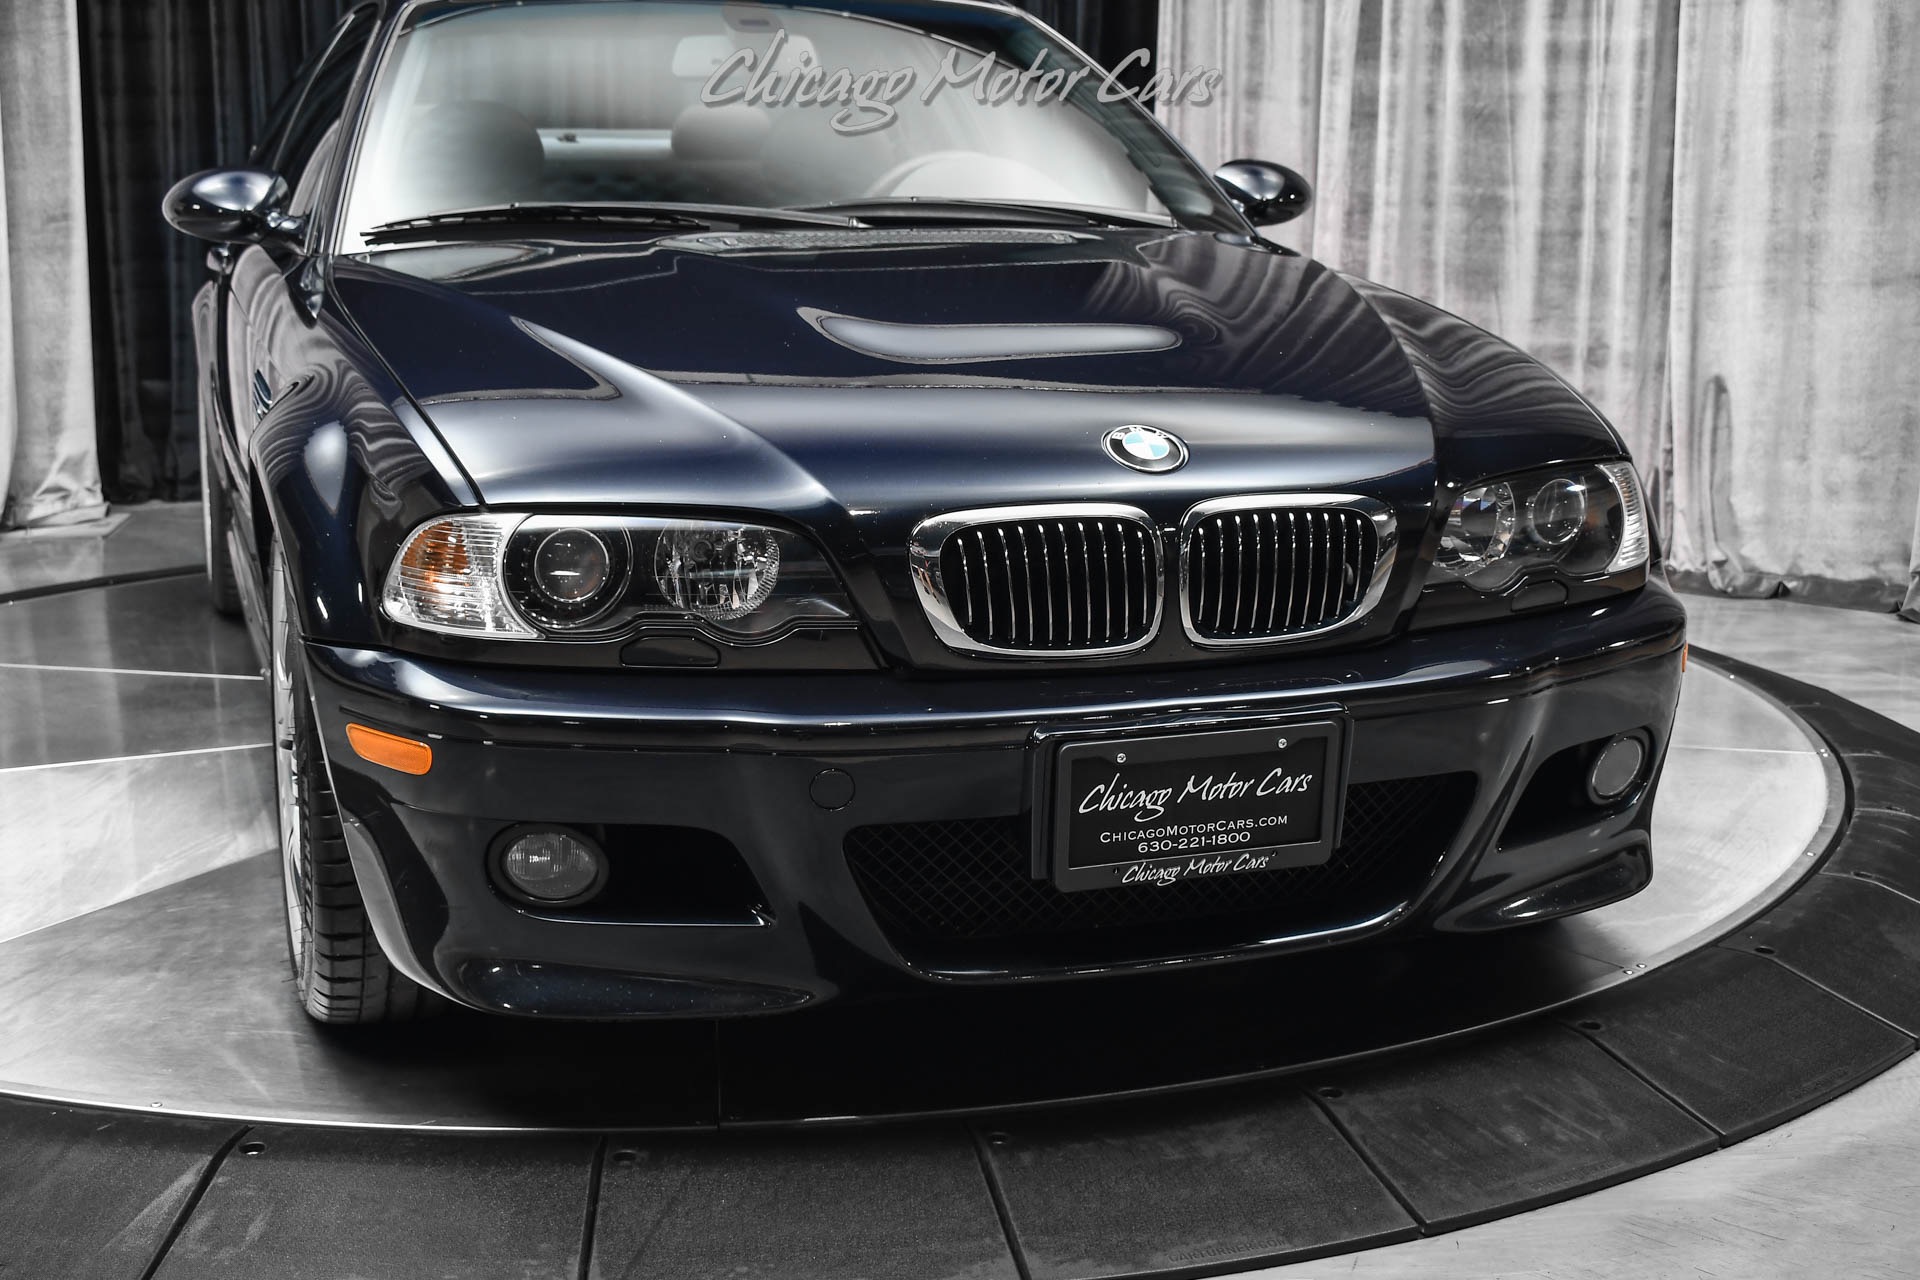 Used 2004 BMW M3 Coupe E46 LOW Miles Carbon Black! 6-Speed Manual